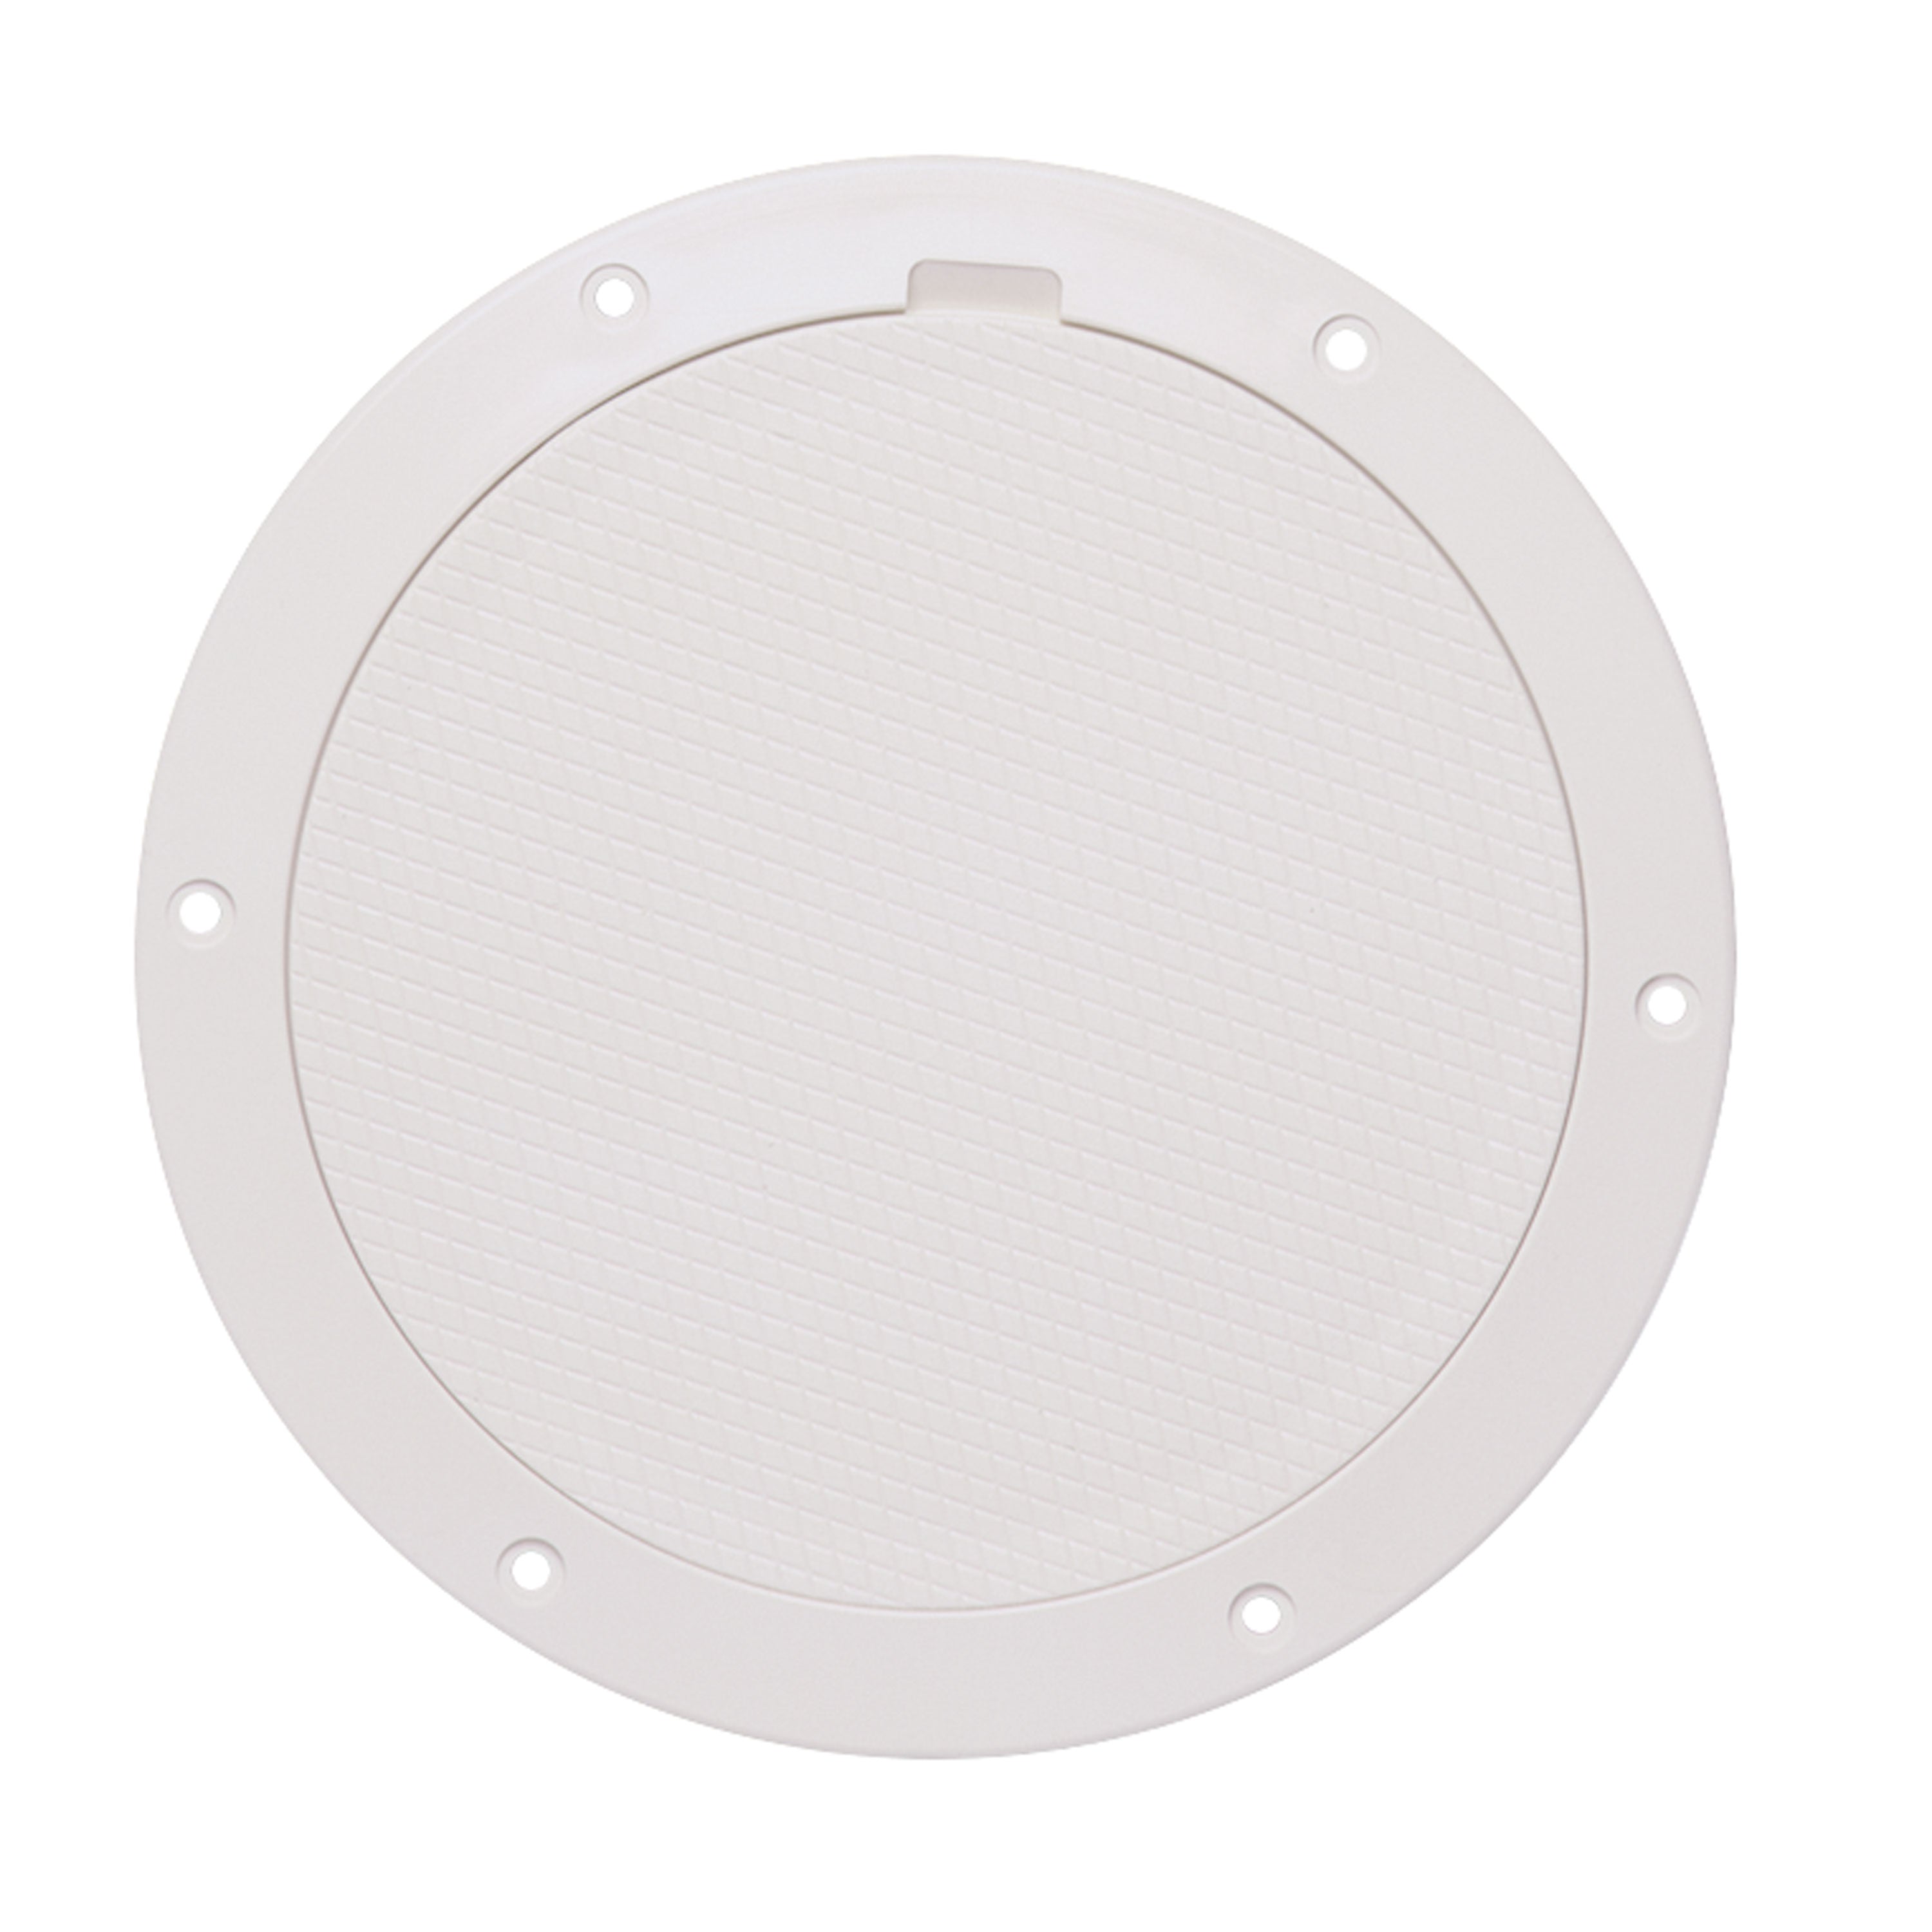 Beckson DP65-W Pry-Out Deck Plate - 6" with Diamond Center, White